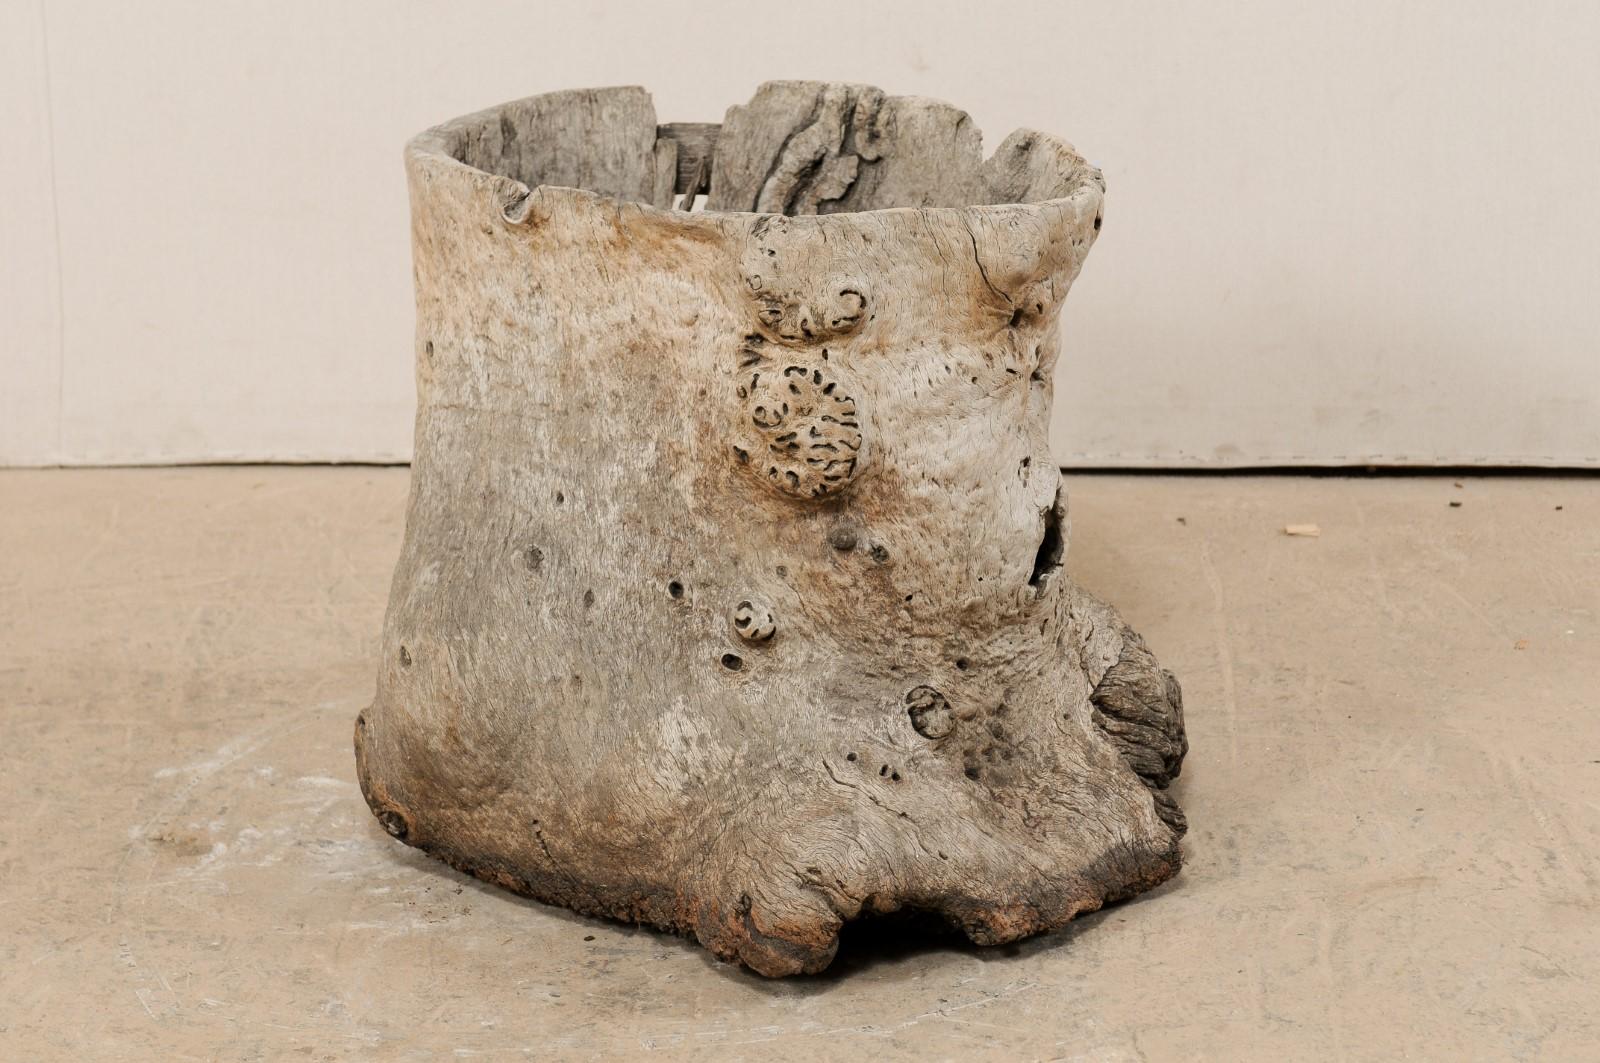 A nicely-sized European hollowed tree stump vessel from the 19th century. This antique tree stump from Europe, with hollowed center, has a marvelous organic form with knobby areas. There is a nice old repair which can be seen along a cracked seam